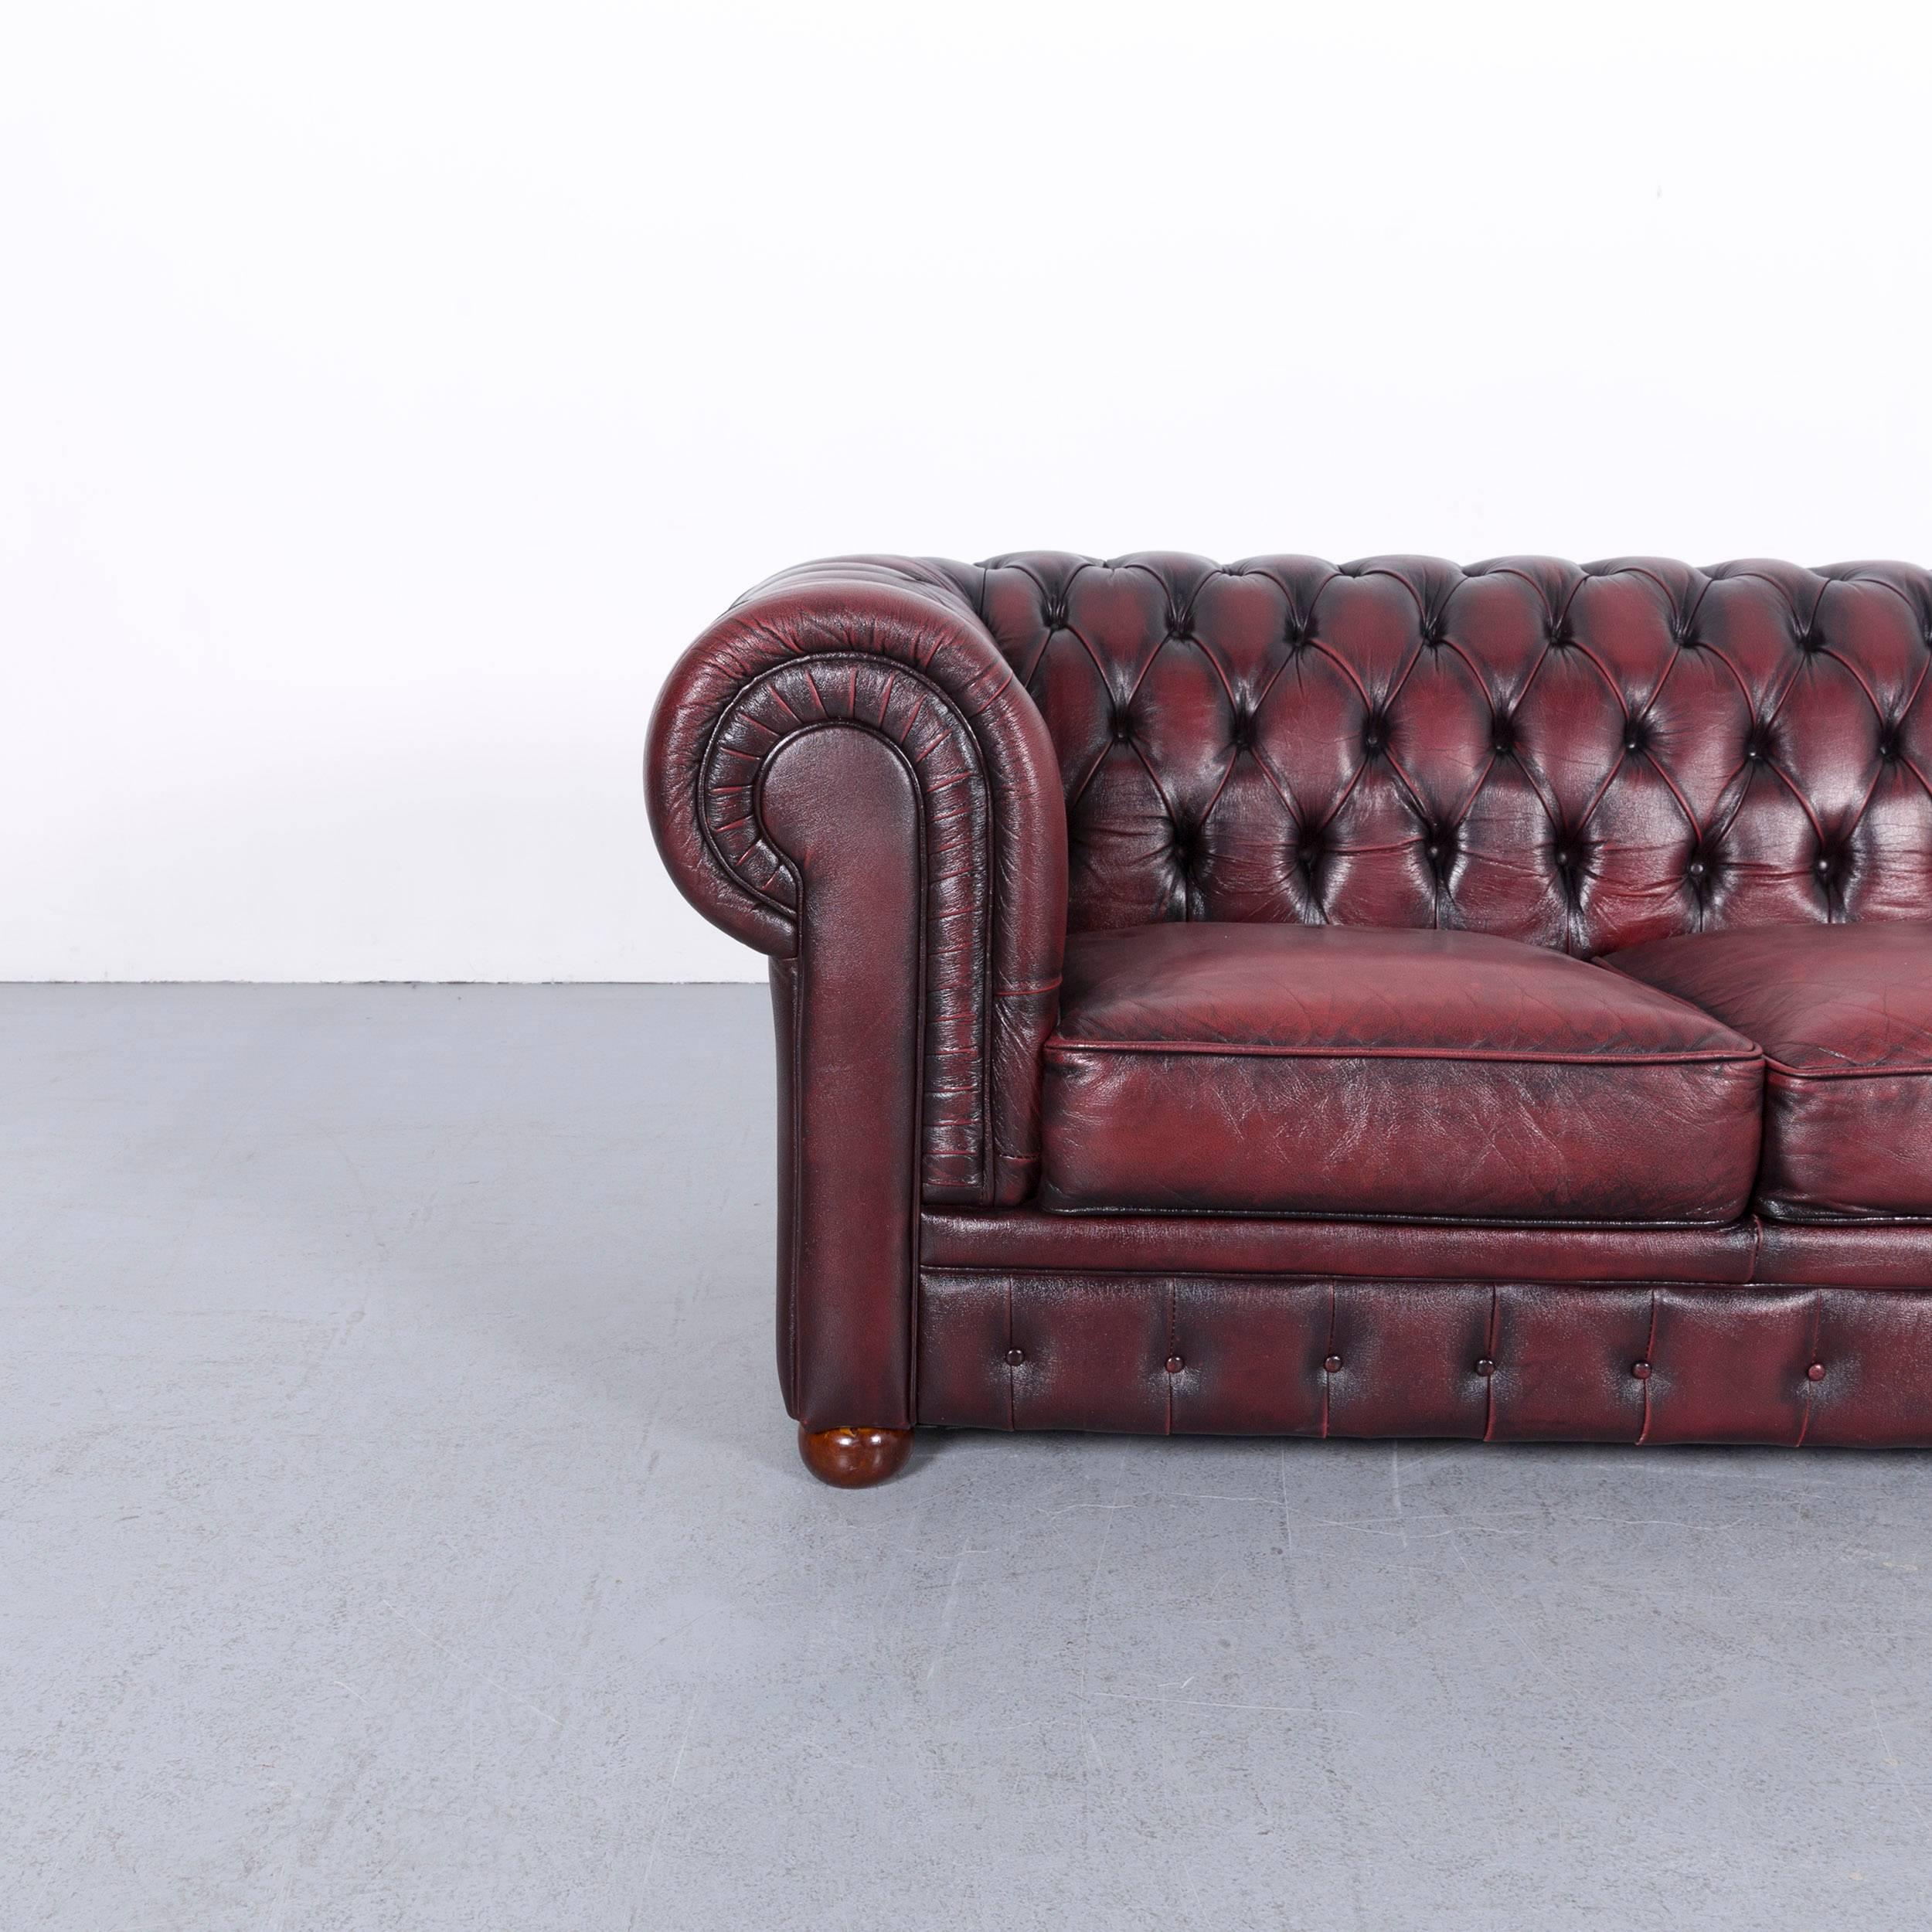 We bring to you an Chesterfield leather sofa red three-seat couch.
































